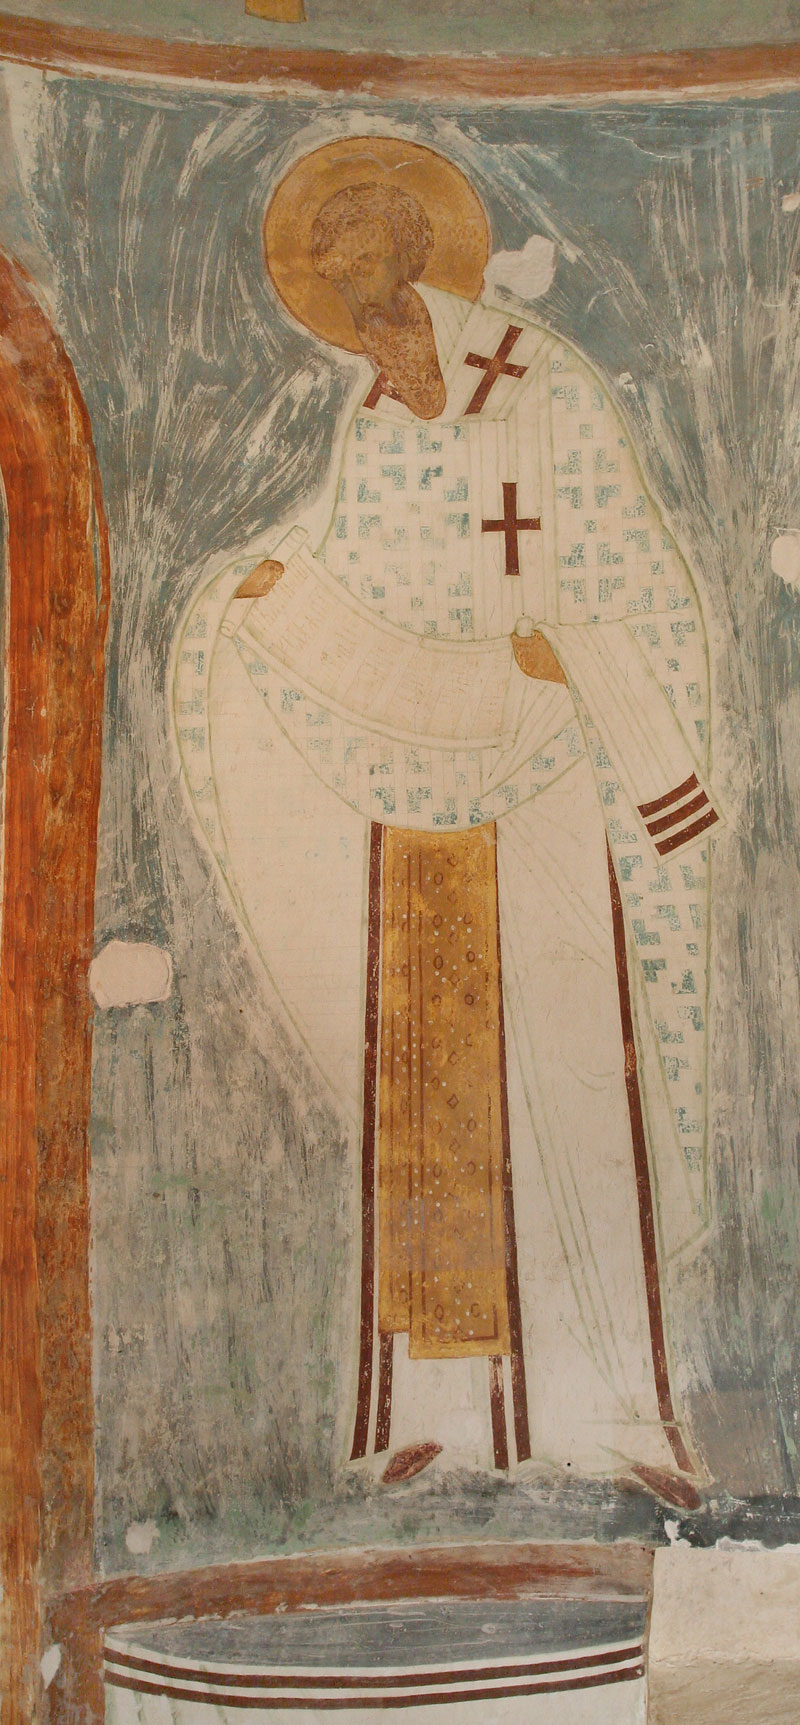 Dionisy's frescoes. Saint Priest Basil the Great from The Liturgy of Church Fathers